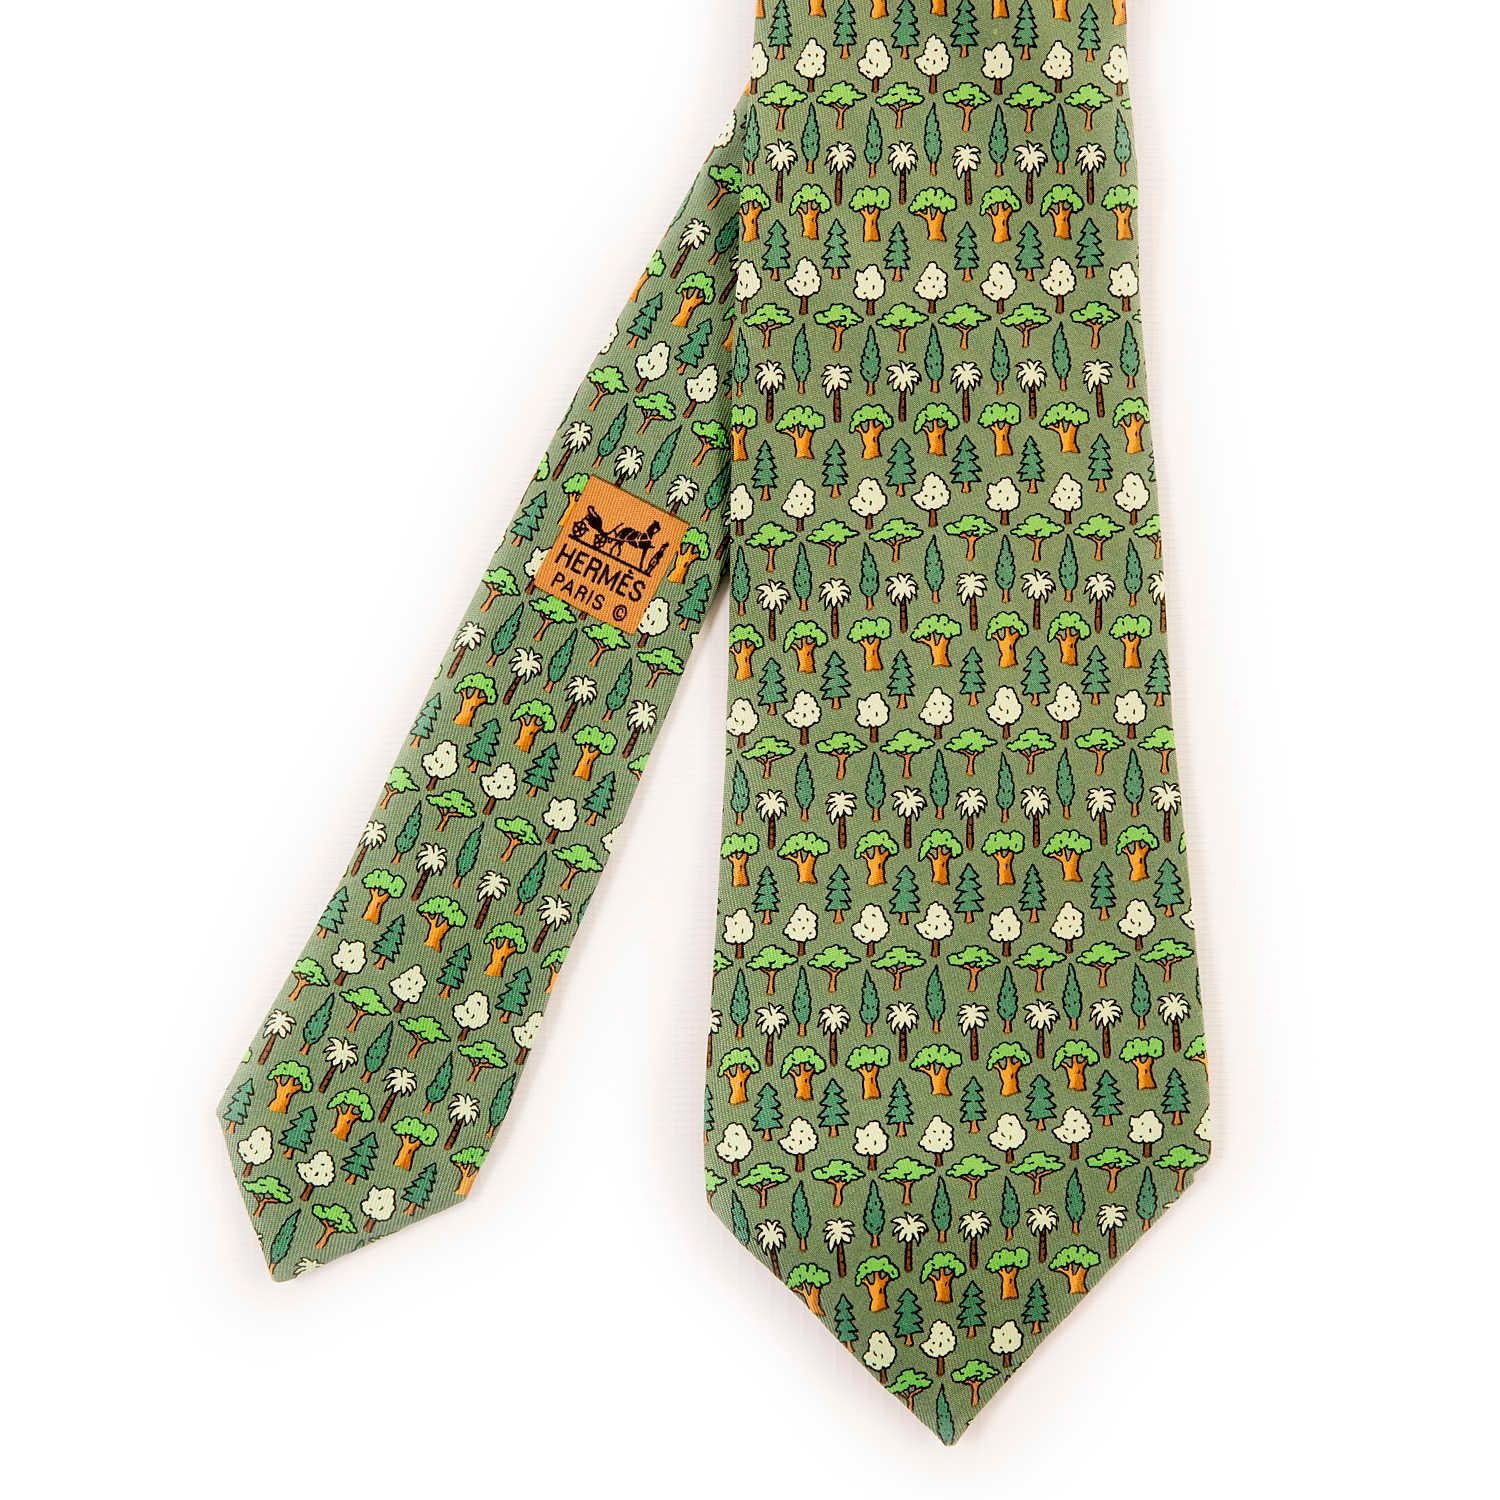 A delightful Hermes Vintage Silk Tie 'Evergreen' features whimsical designs of Evergreen trees. The Tie is on an apple green ground.